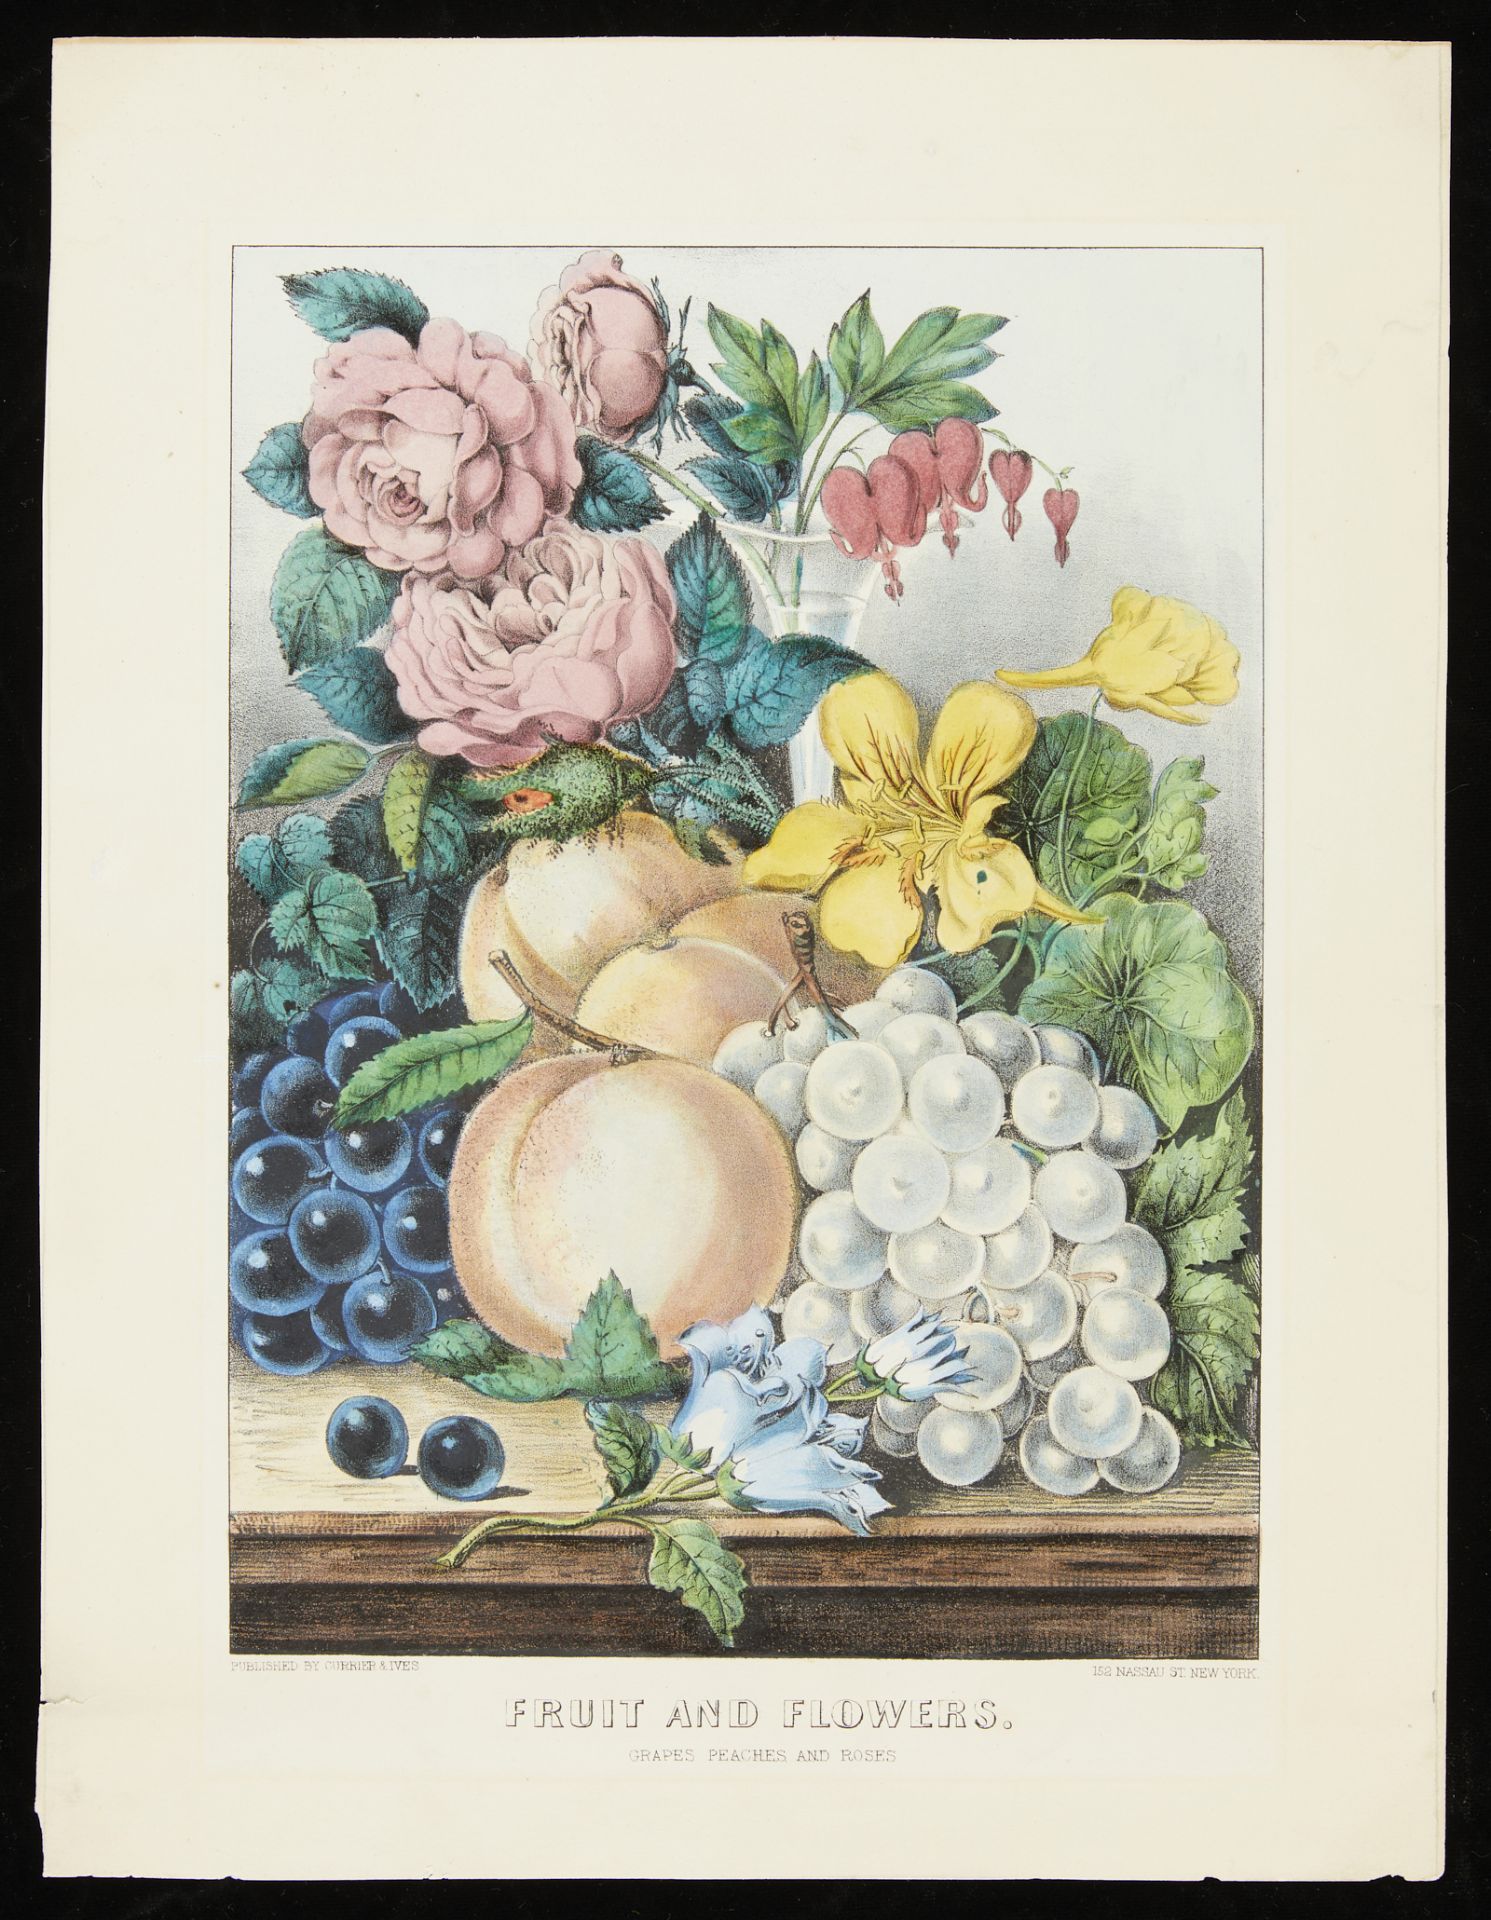 Currier & Ives "Fruit & Flowers" Print 1870 - Image 3 of 8